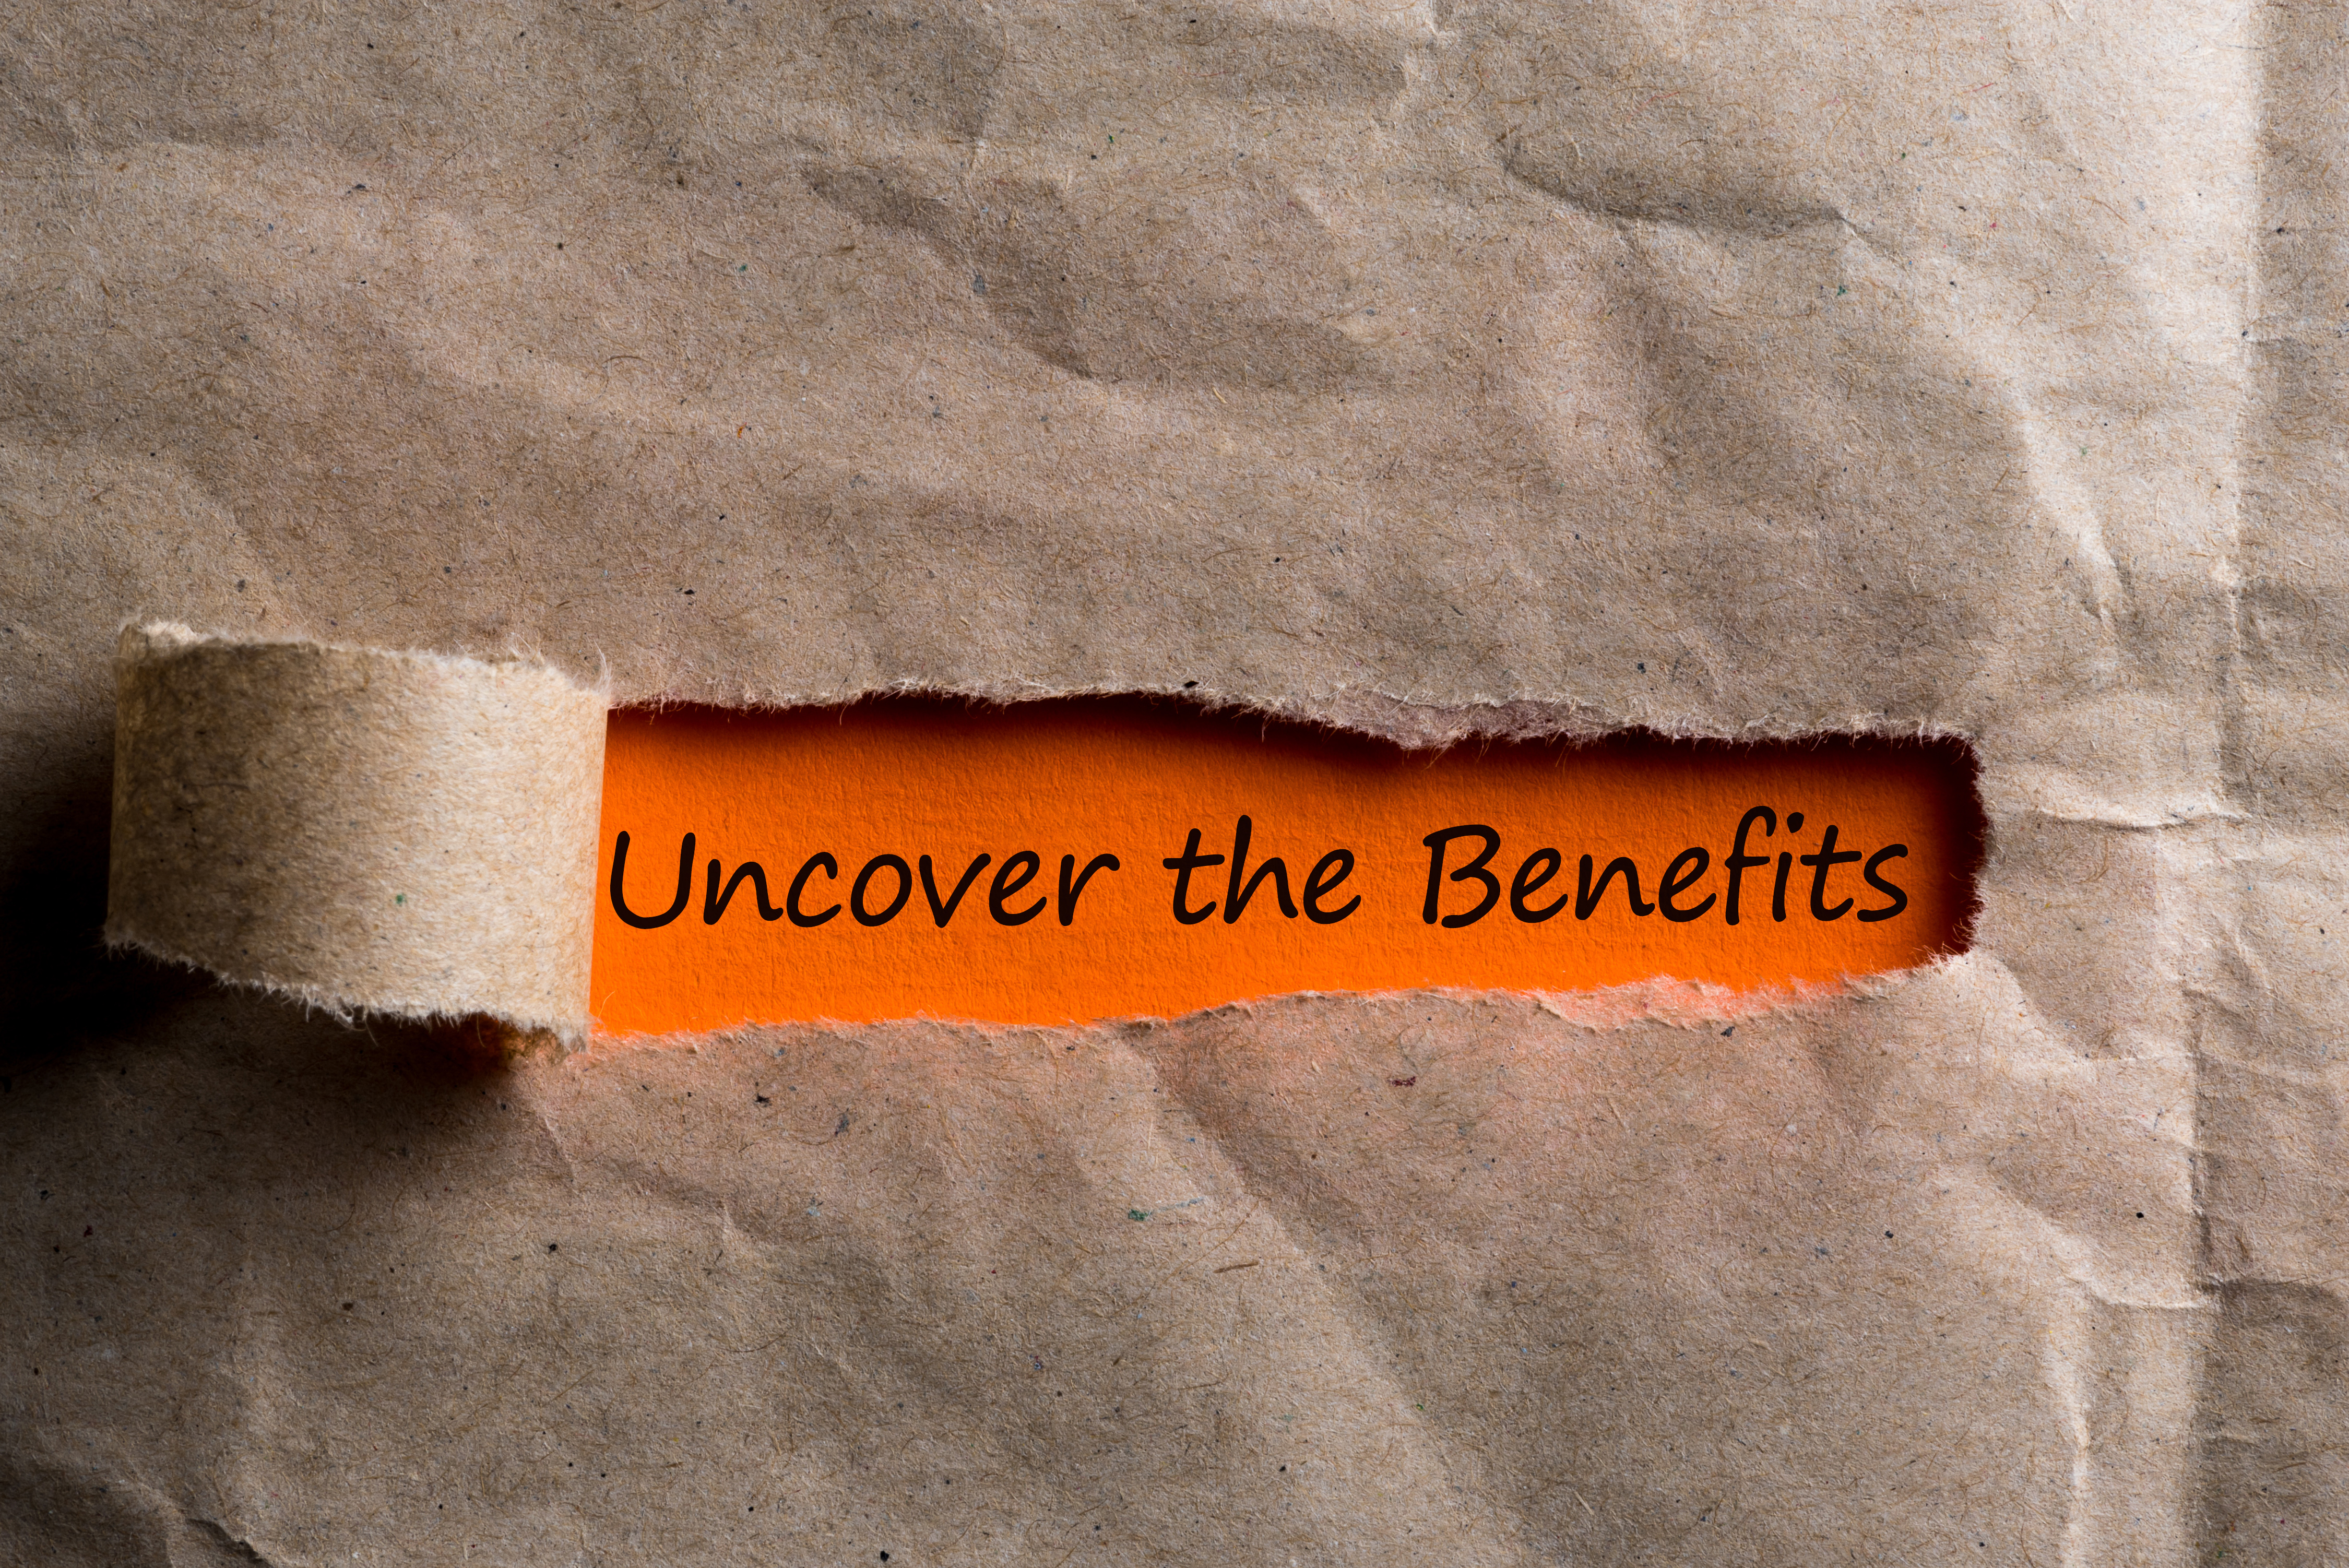 Uncover The Benefits message in letter or note, appearing behind ripped brown paper of envelope